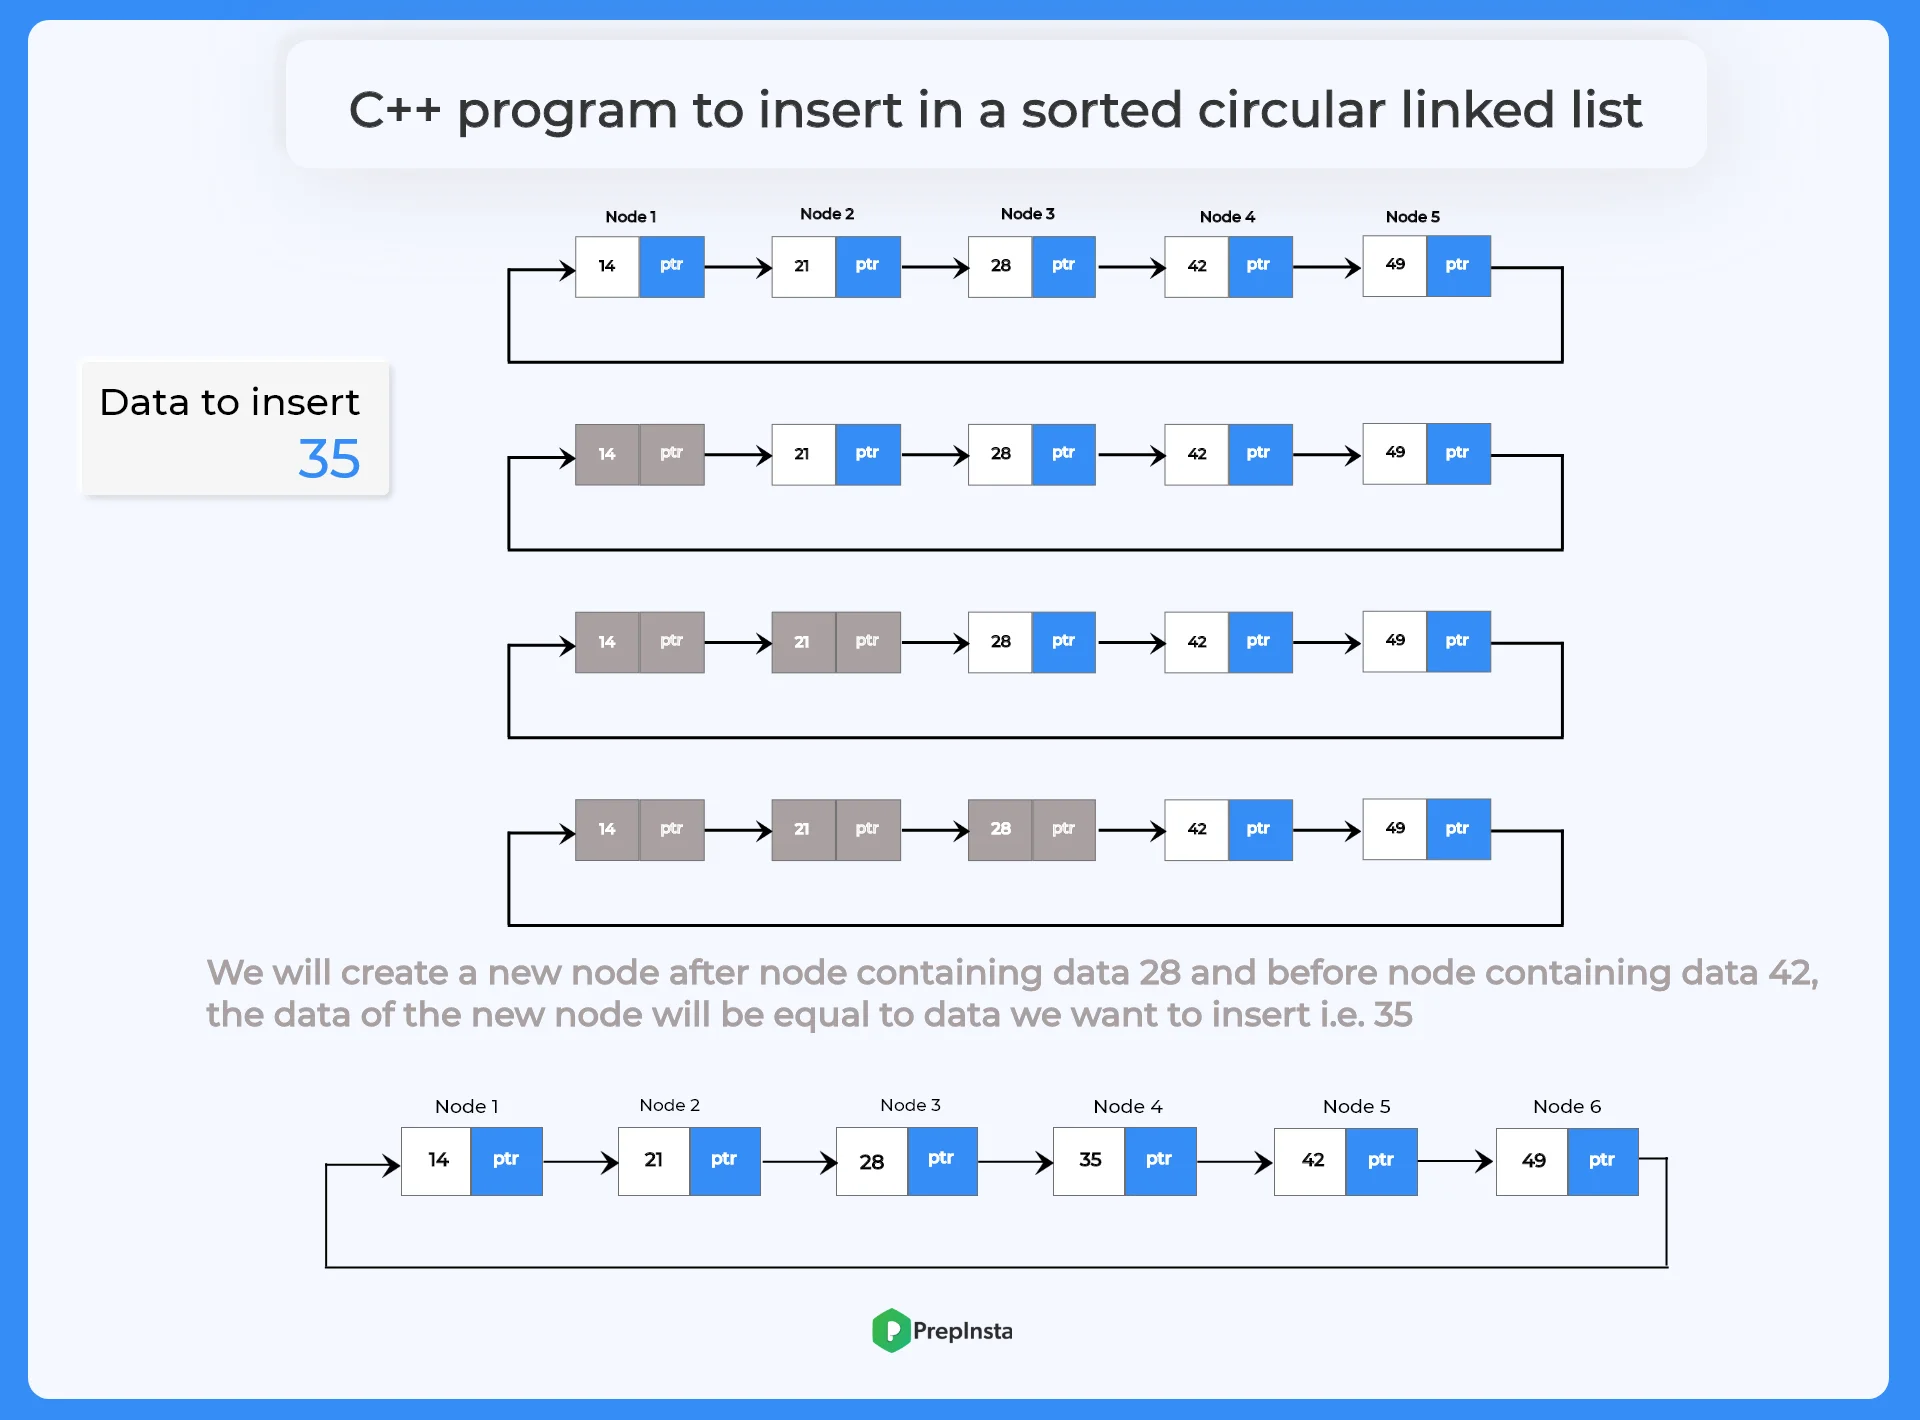 C++ program to insert in a sorted circular linked list